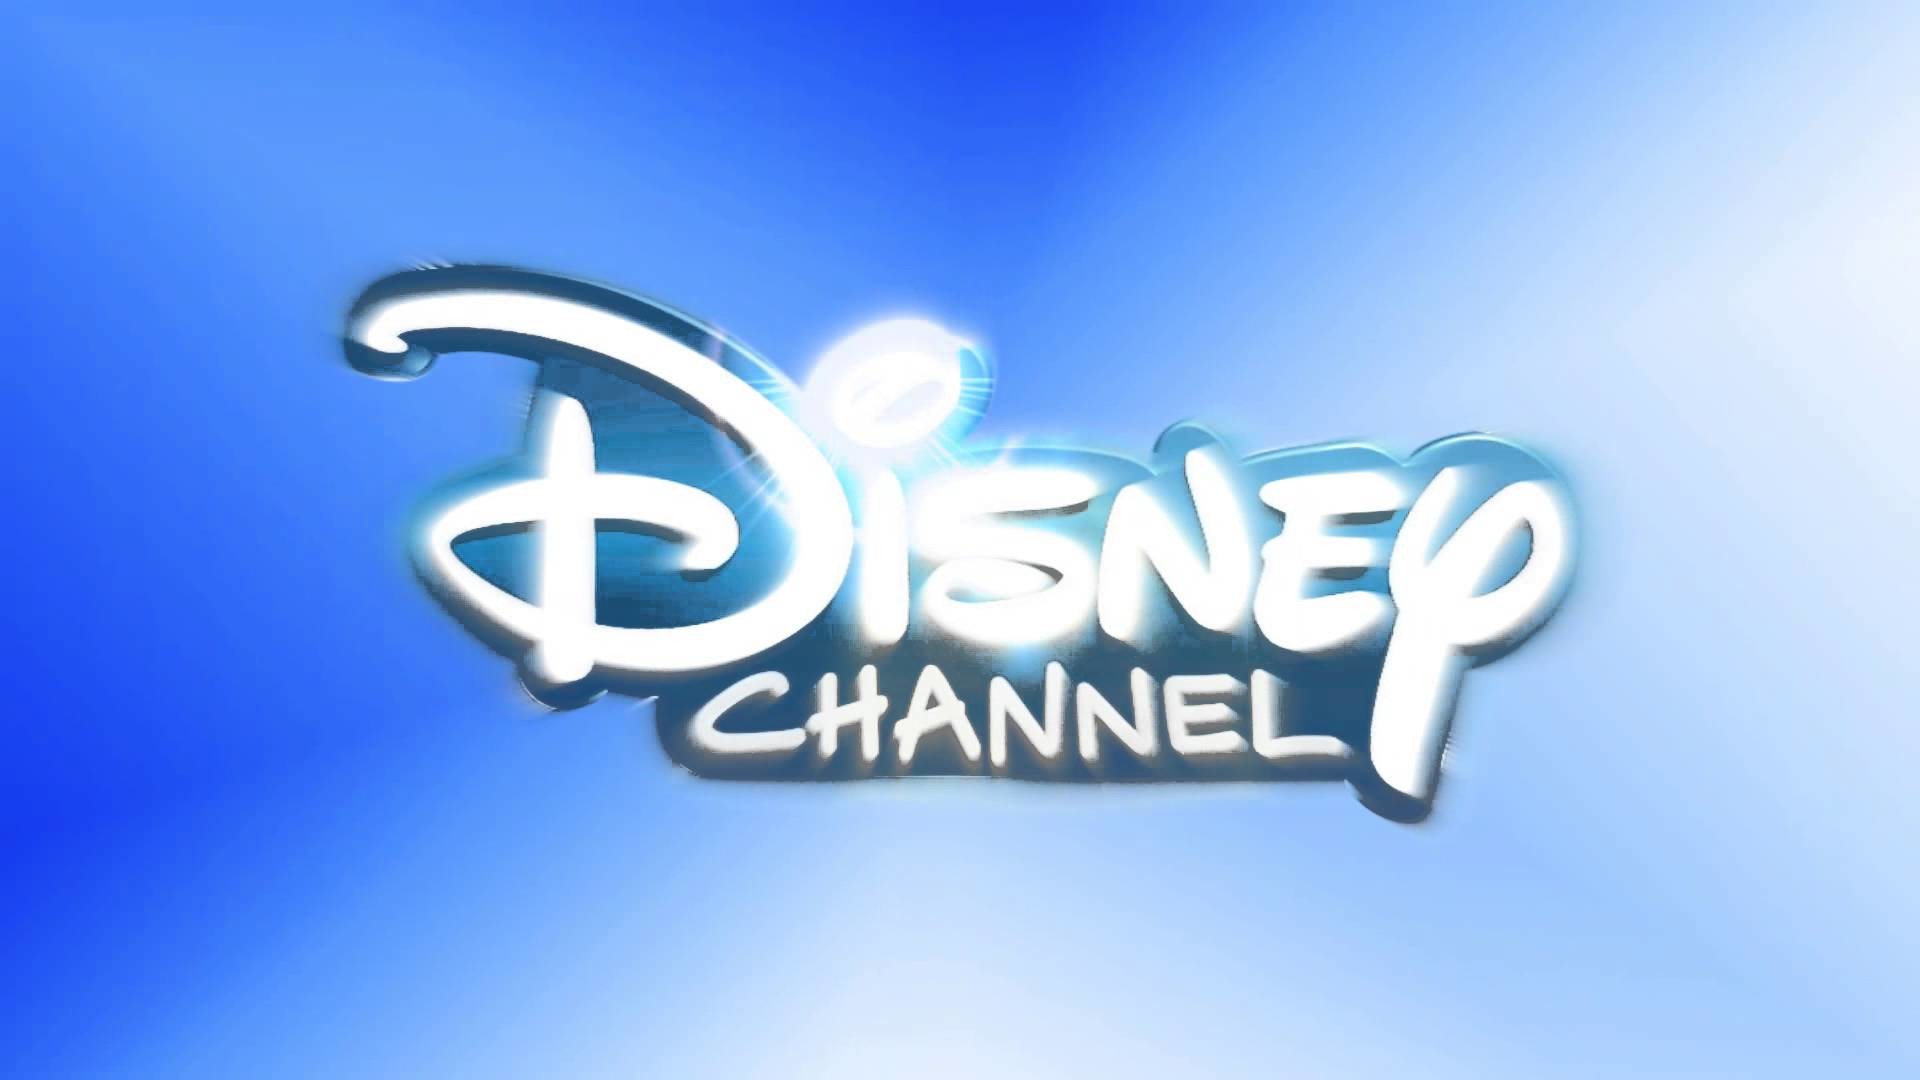 1920x1080 Disney channel Germany... pic source